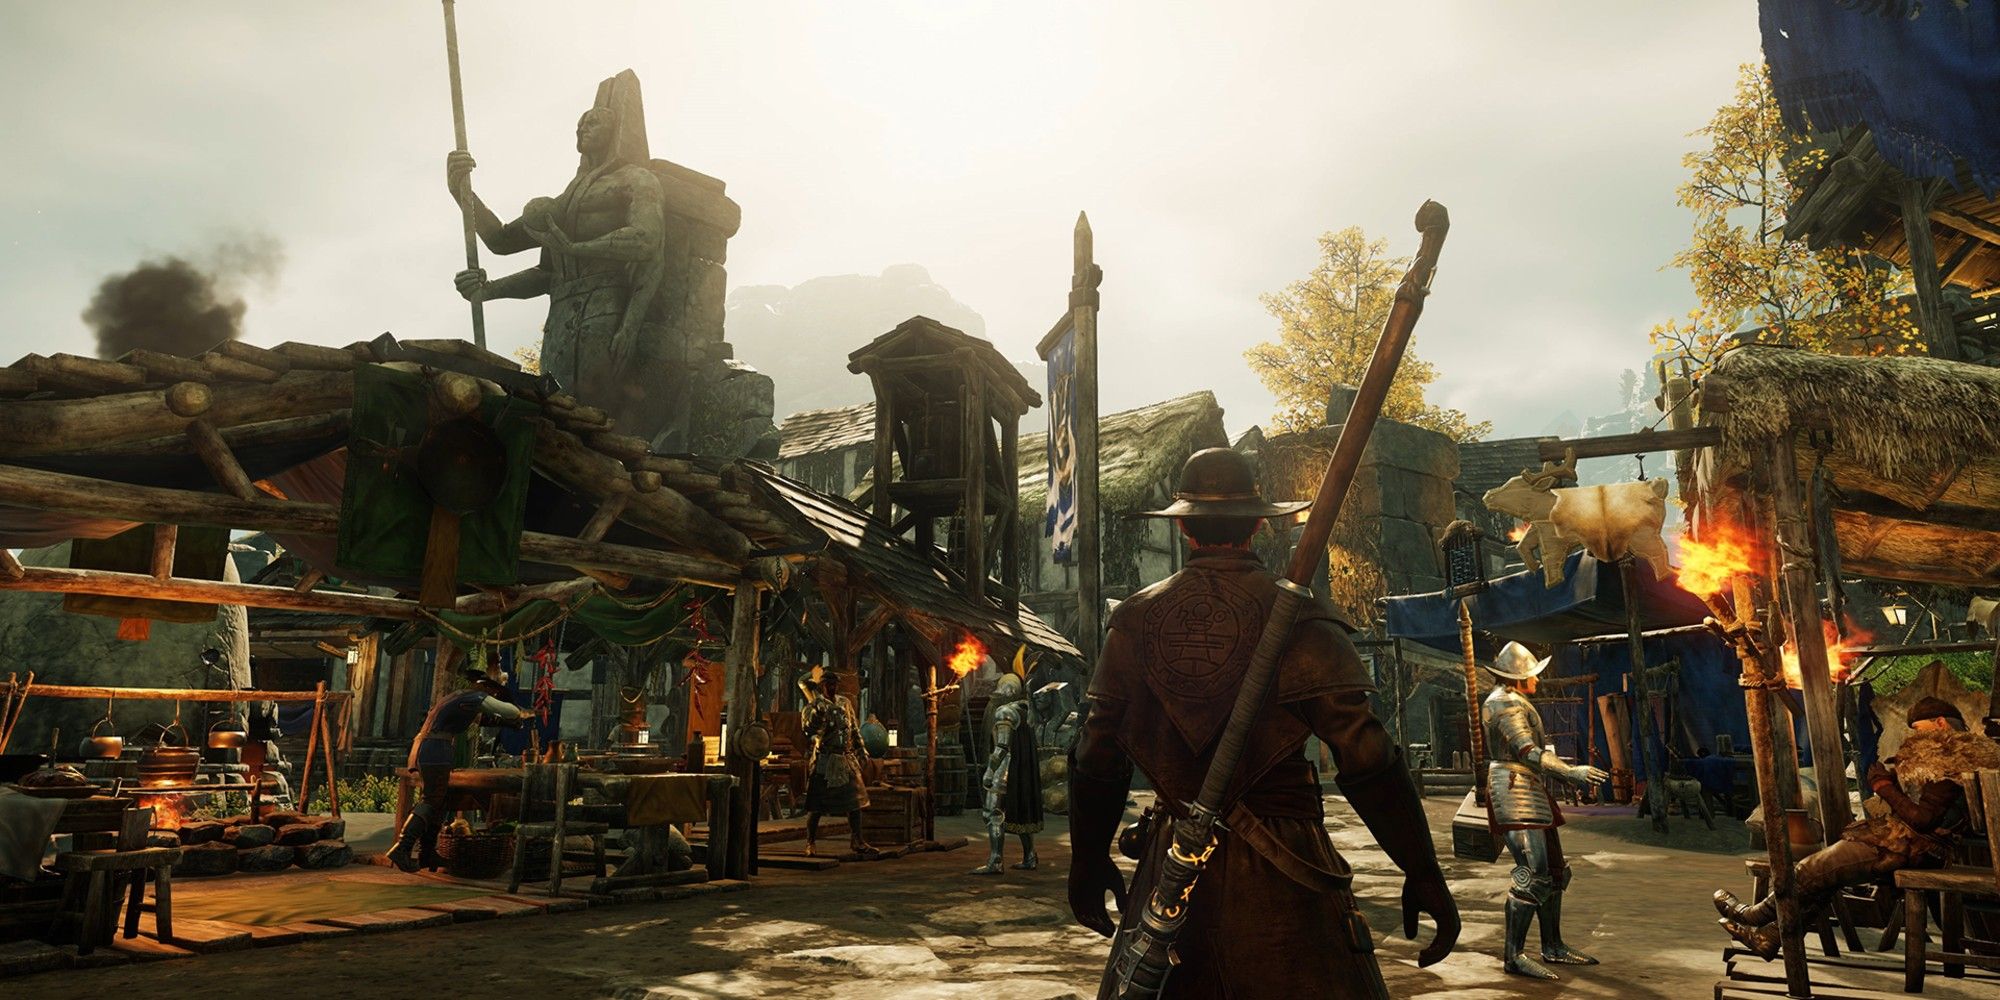 A player enters a settlement in New World